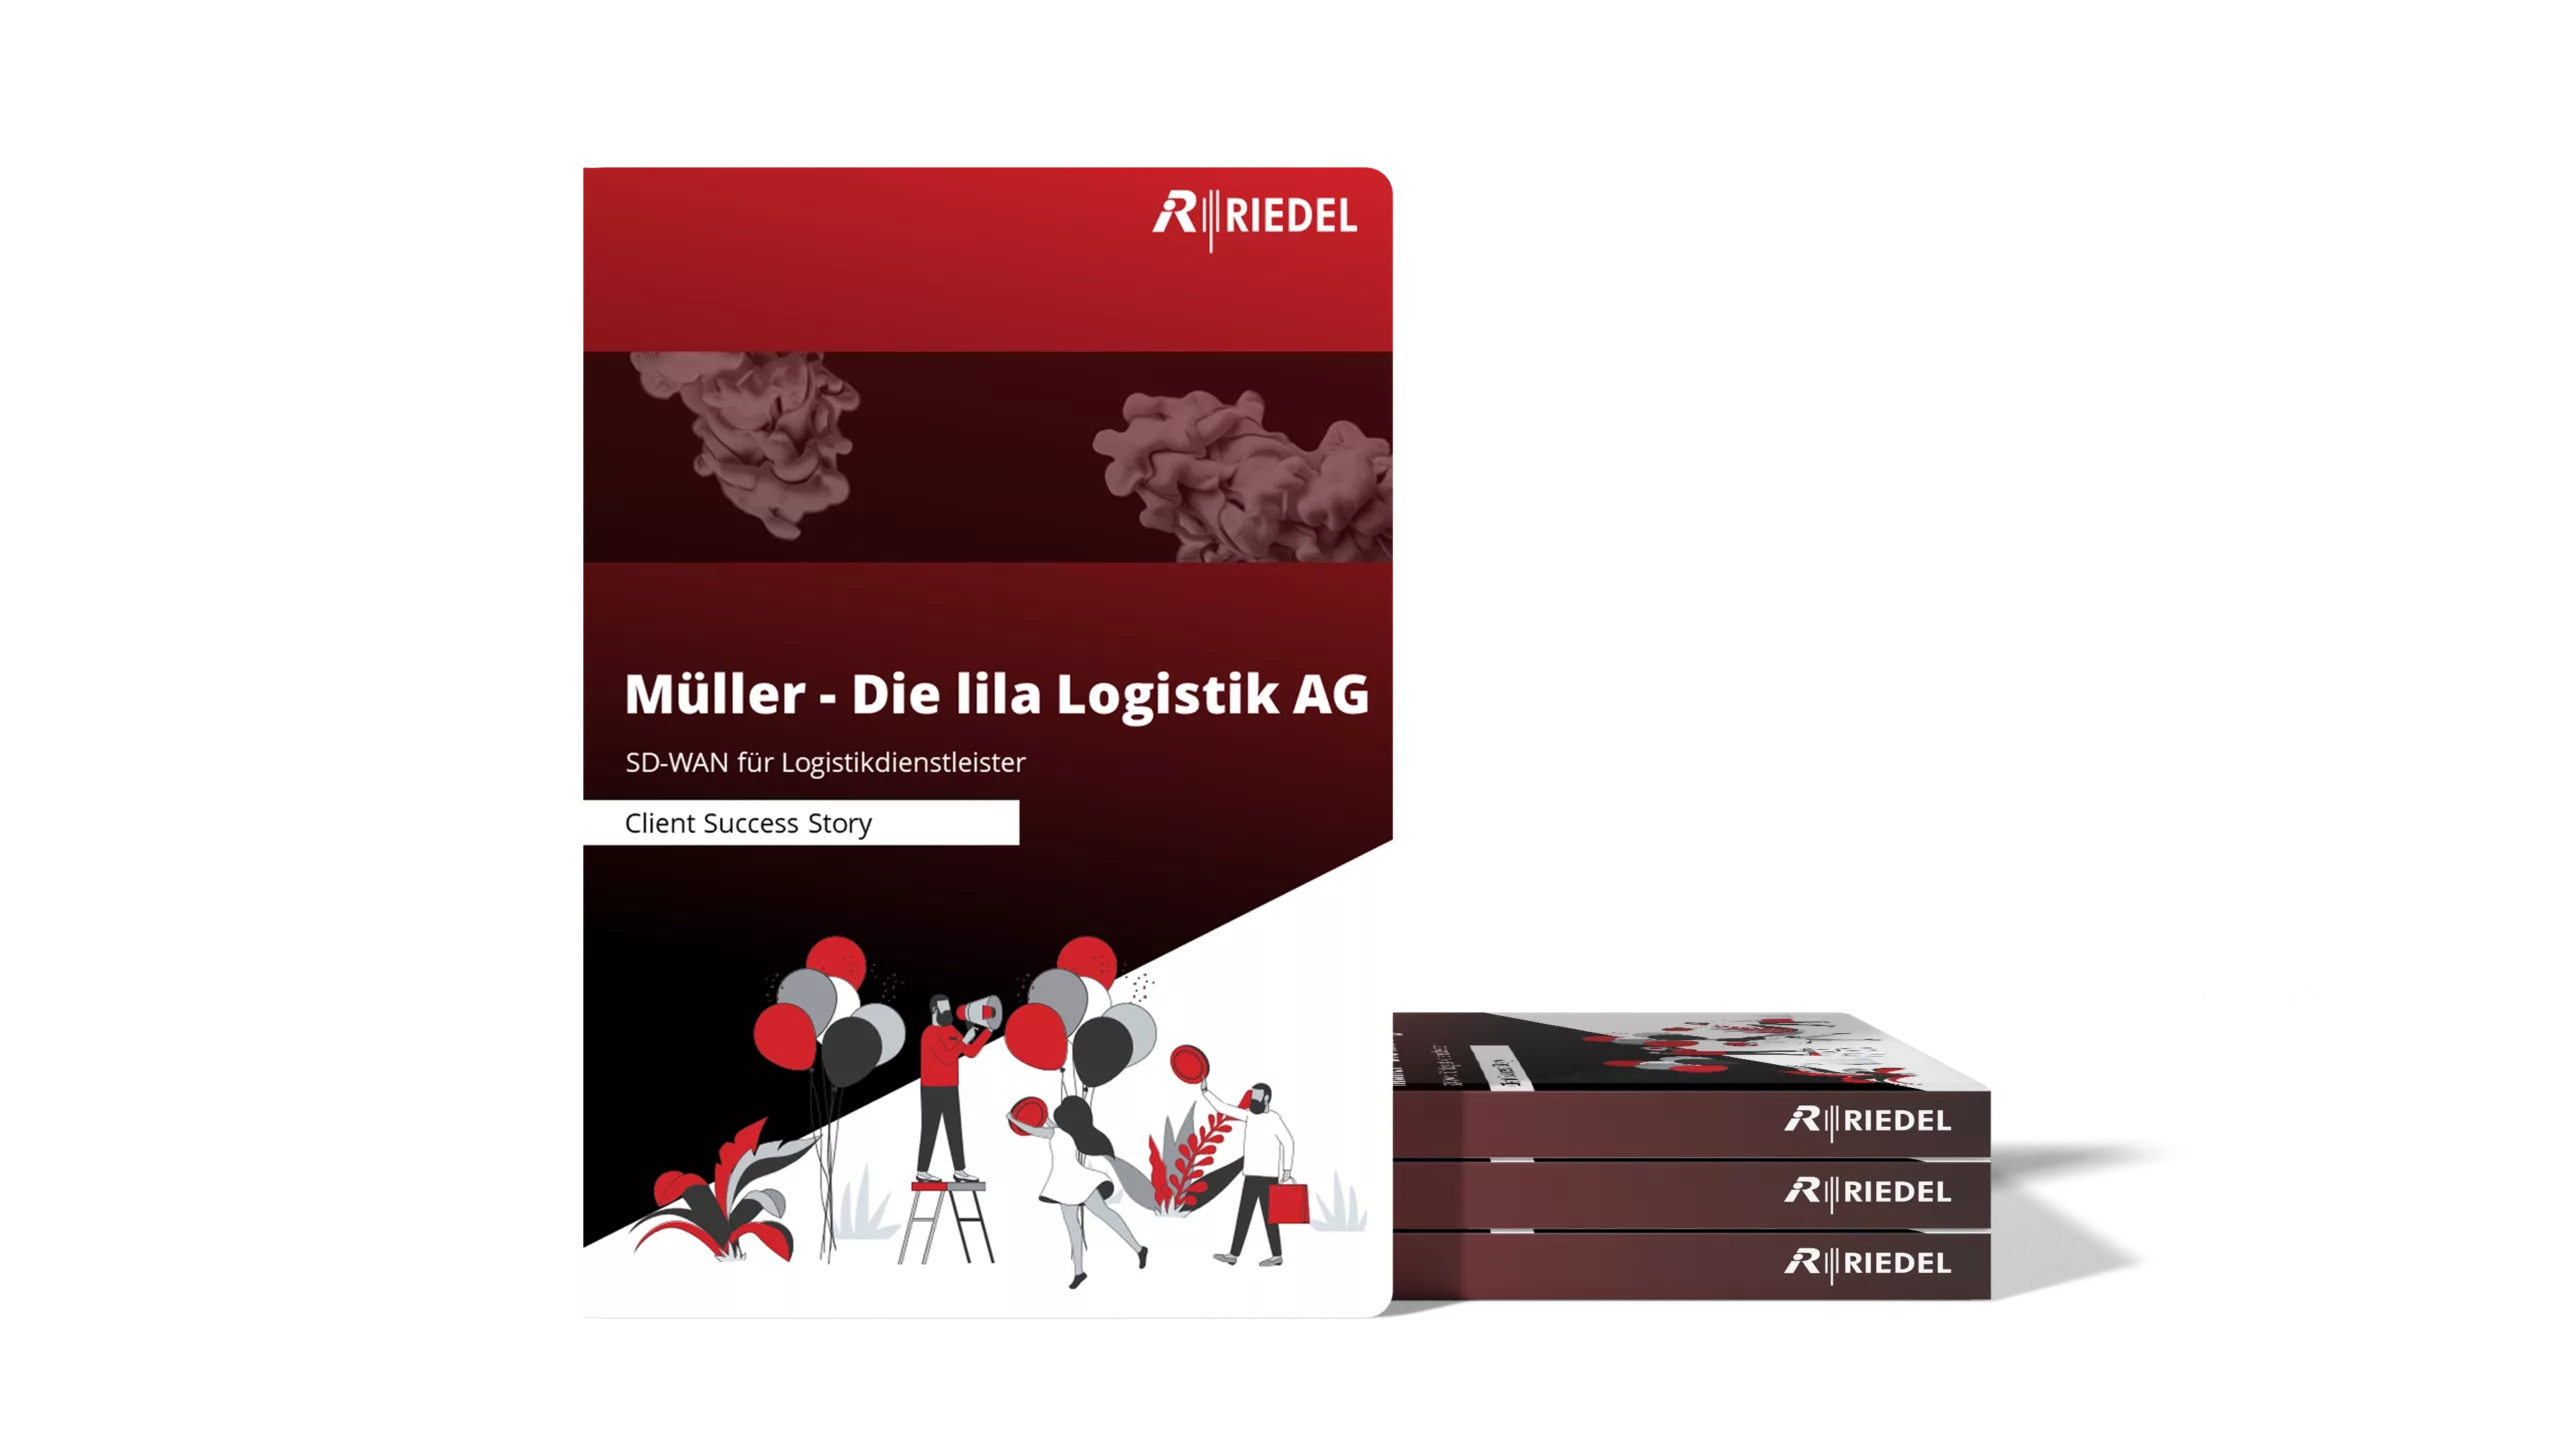 RIEDEL Networks Success Story with Müller - die lila Logistik AG